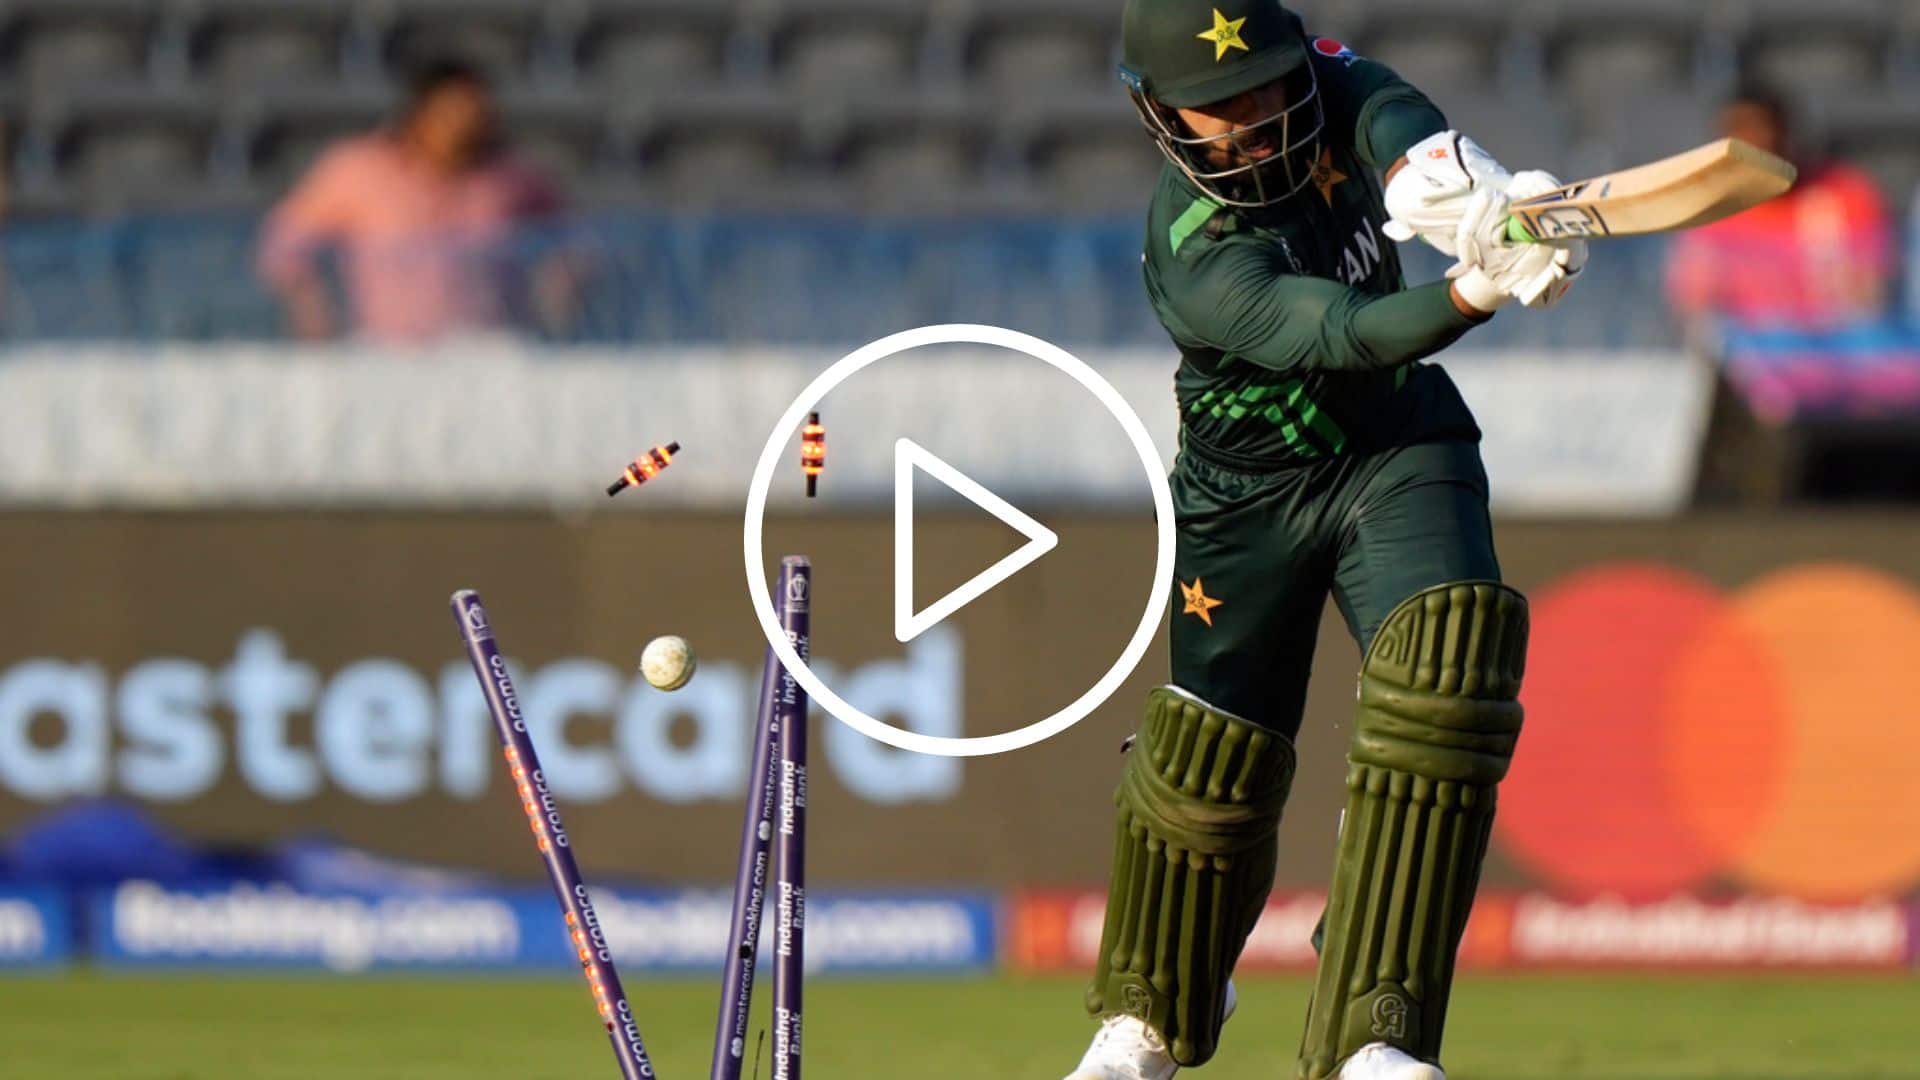 [Watch] Shadab Khan Knocked Over By Killer Delivery From Bas de Leede